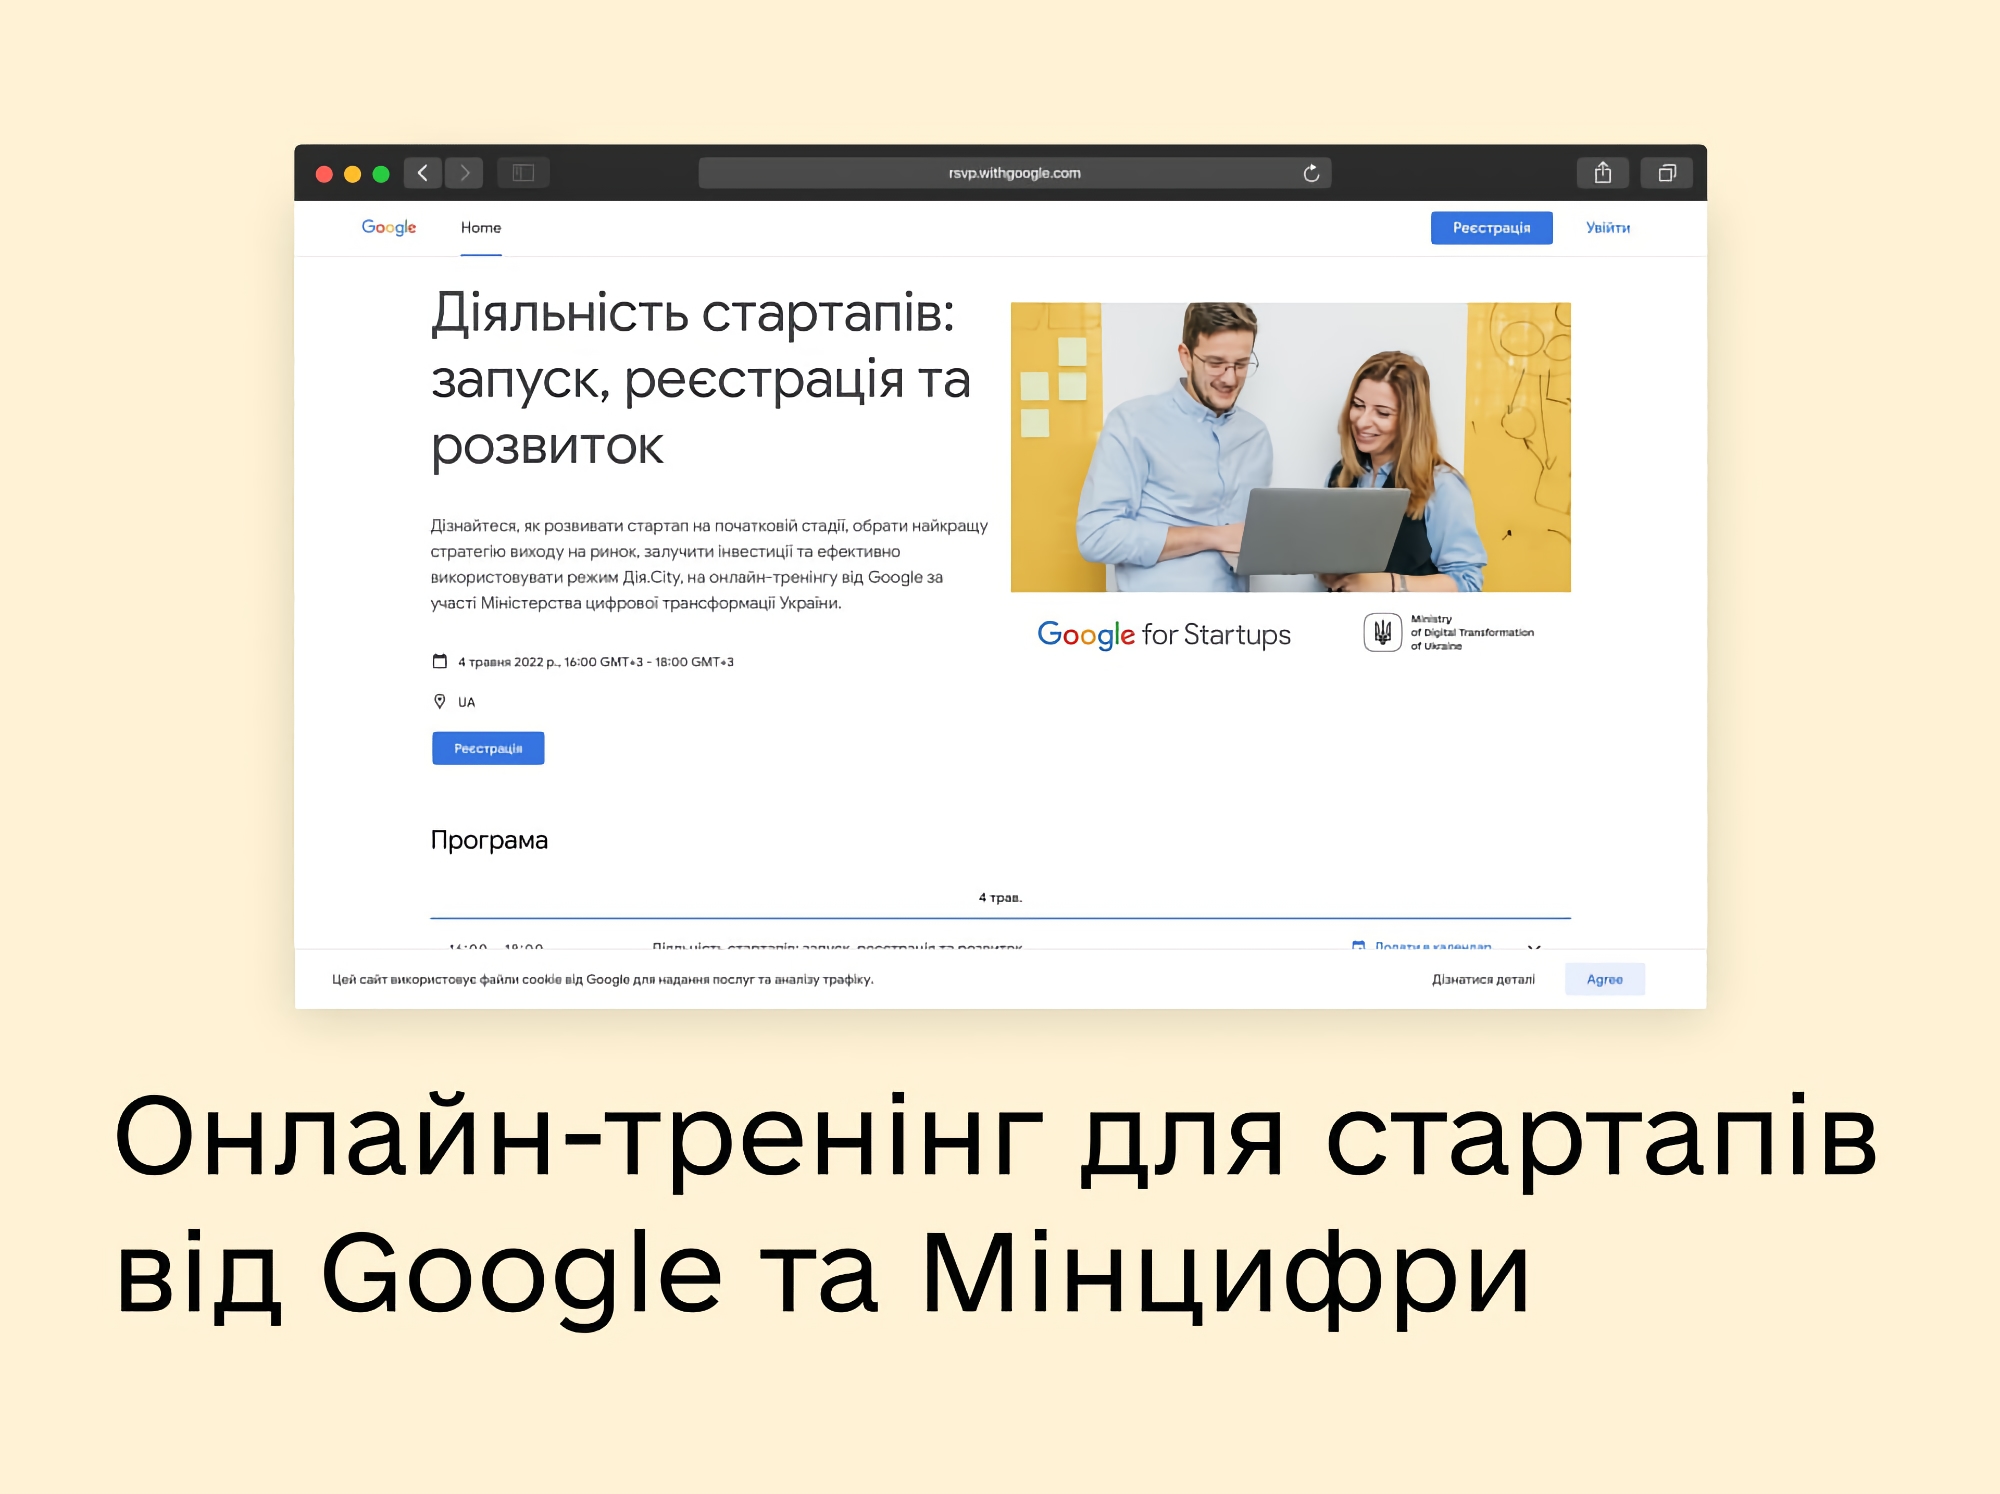 Mintsifra and Google launched free online trainings for startups